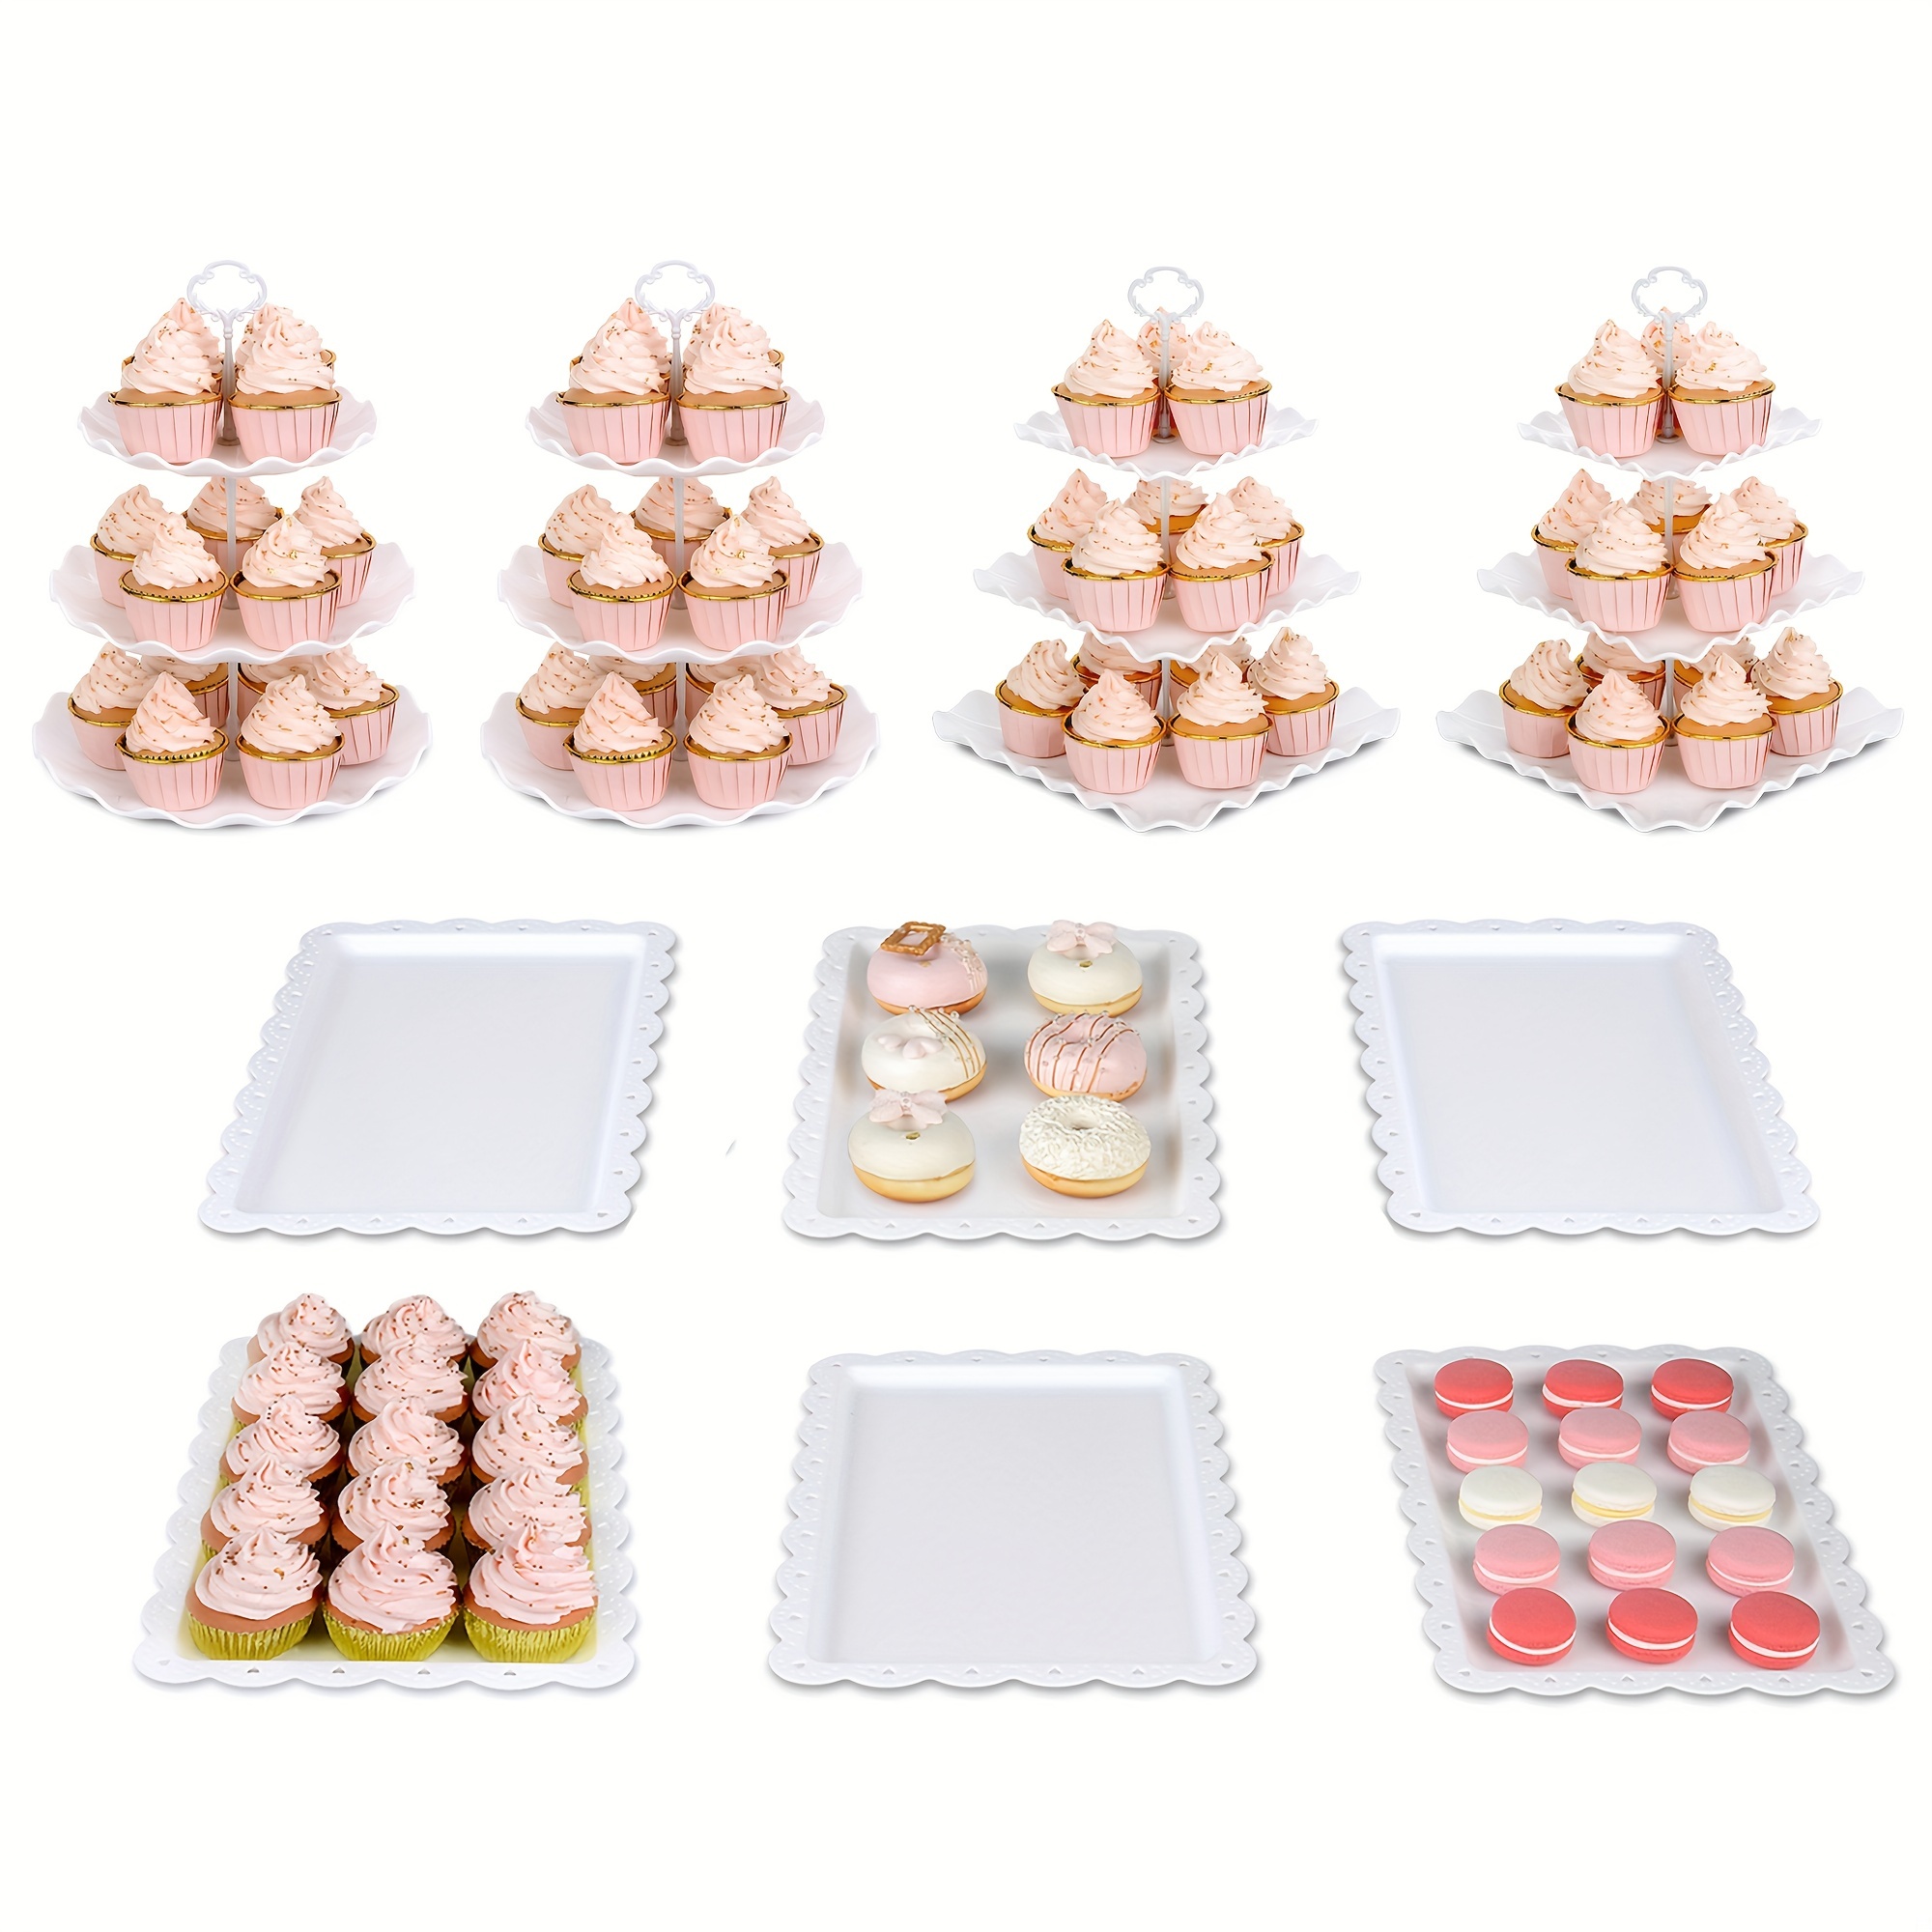 

10pcs/set, Cake Stand, Cupcake Stand, With 2 X Round 3-tier Cupcake Stands And 2 X Square 3-tier Cupcake Stands And 6 X Appetizer Trays, Perfect For Birthday Baby Graduation Wedding New Year Party